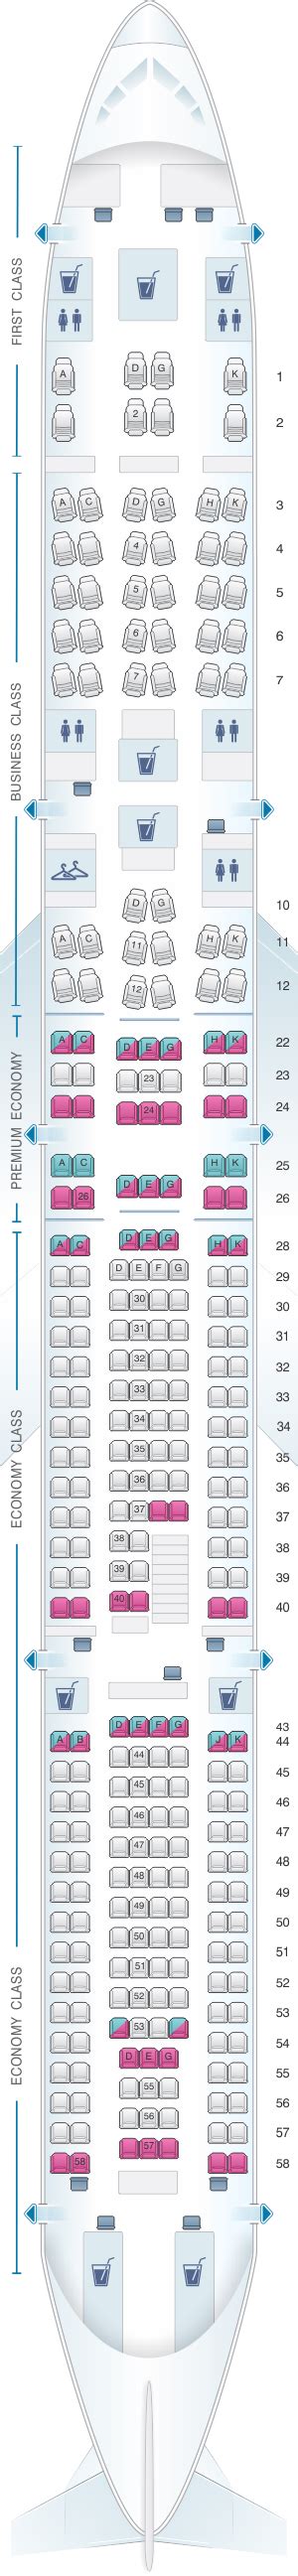 Lufthansa Seat Map A320 Two Birds Home